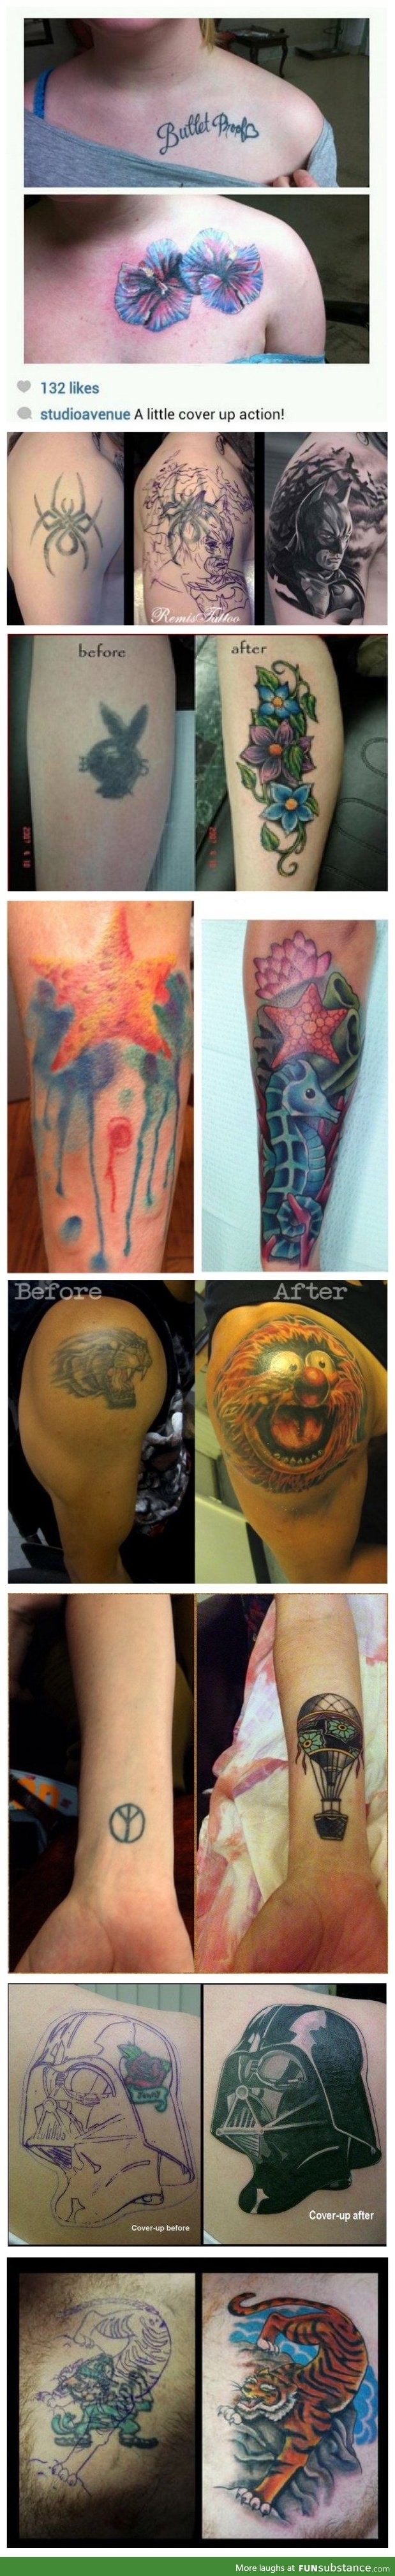 Before/after tattoo mistakes